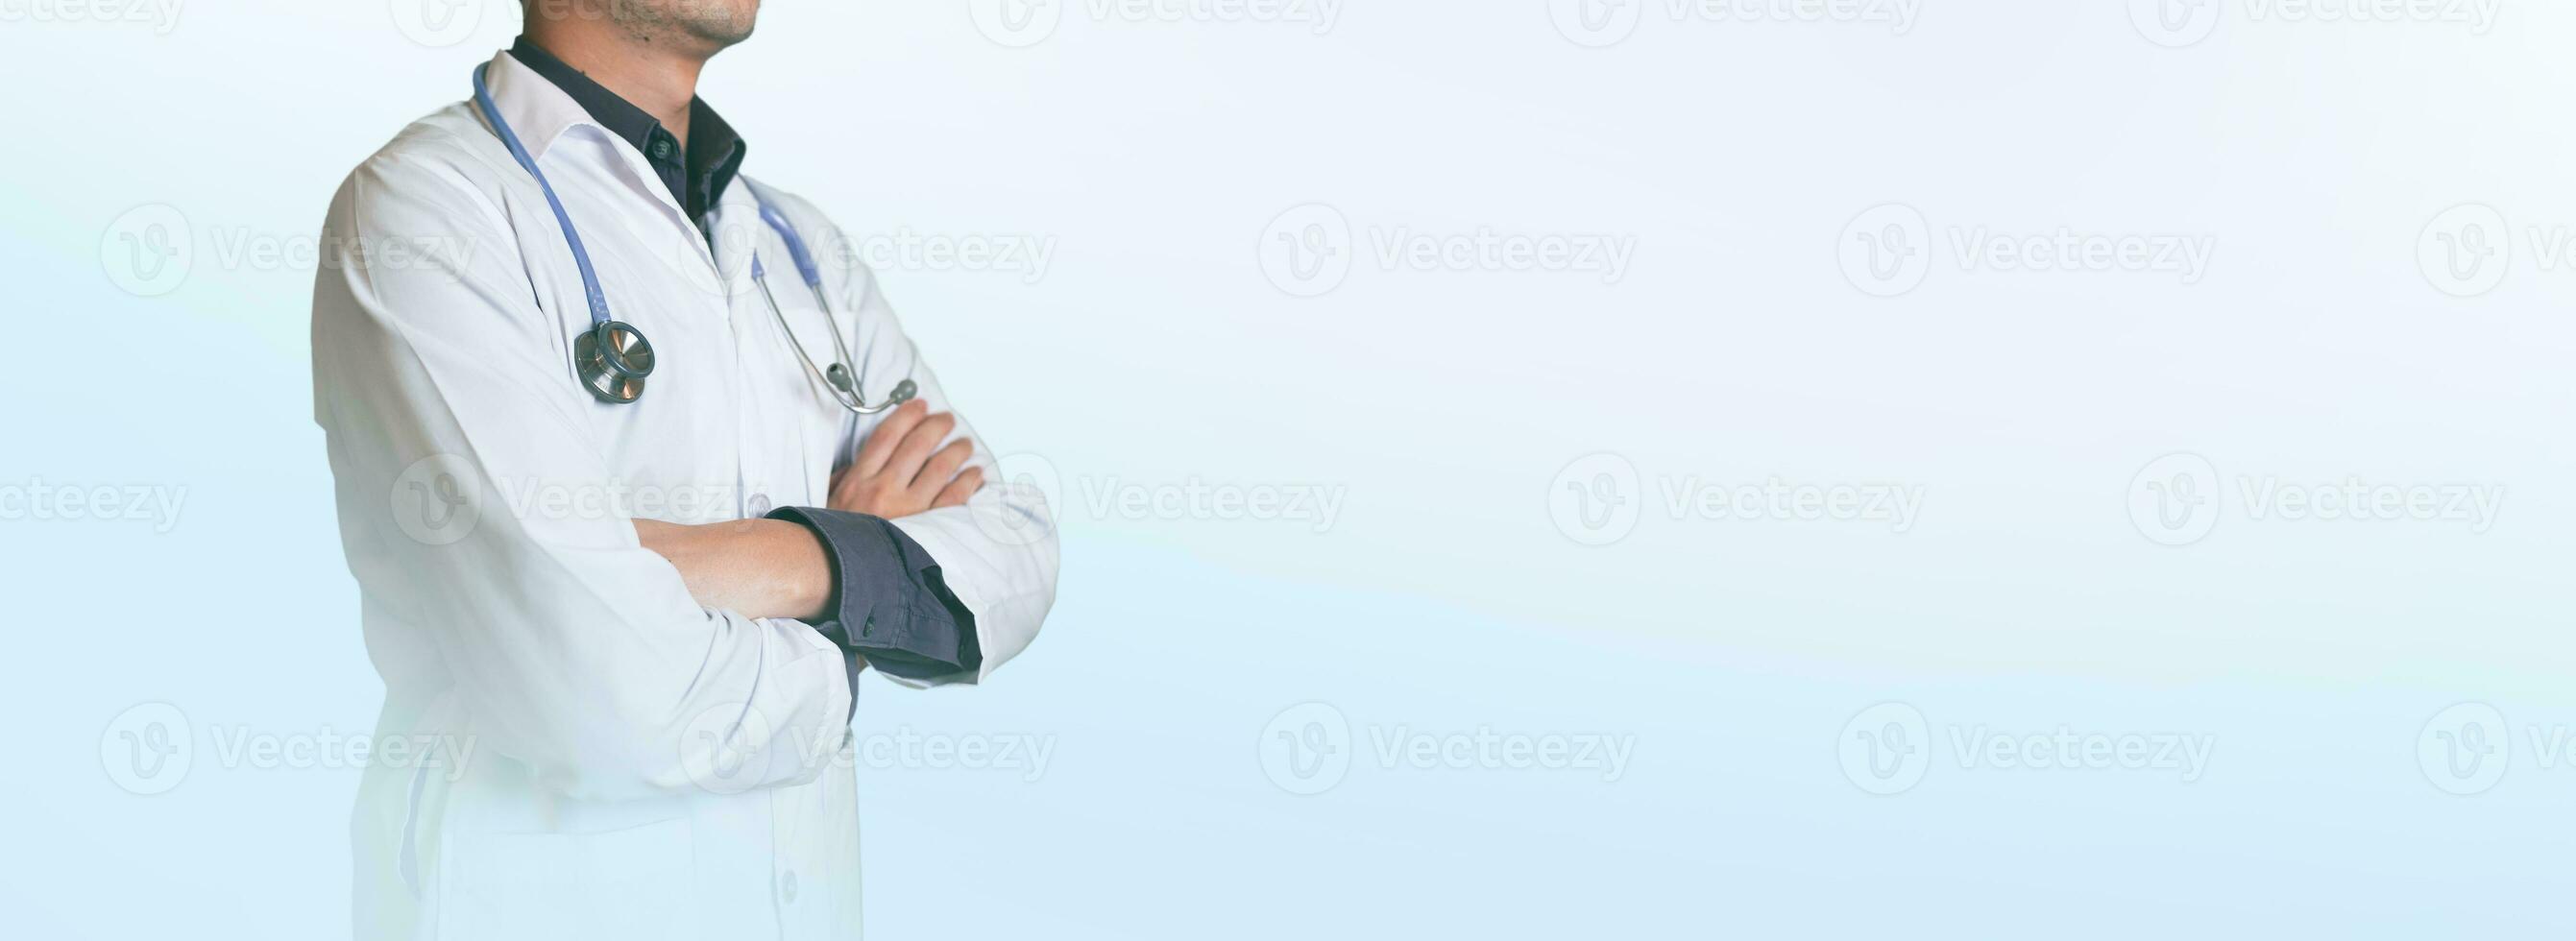 Medicine Doctor or nurse in front of a bright lab background. Healthcare and medical portrait concept. Hospital background photo